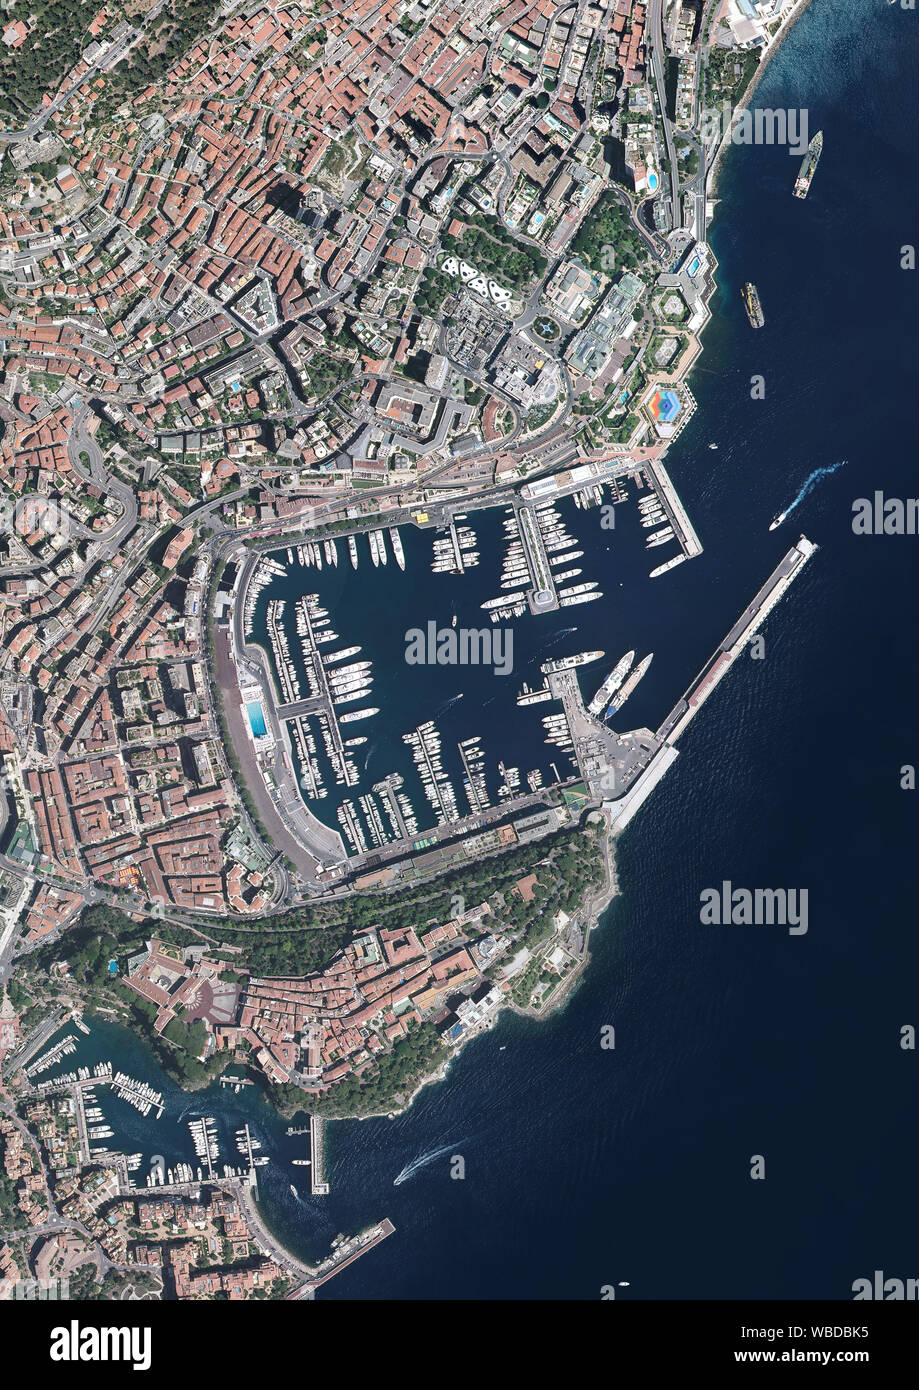 Aerial photography of Monaco City and Port Hercules. Image taken in 2017. Stock Photo